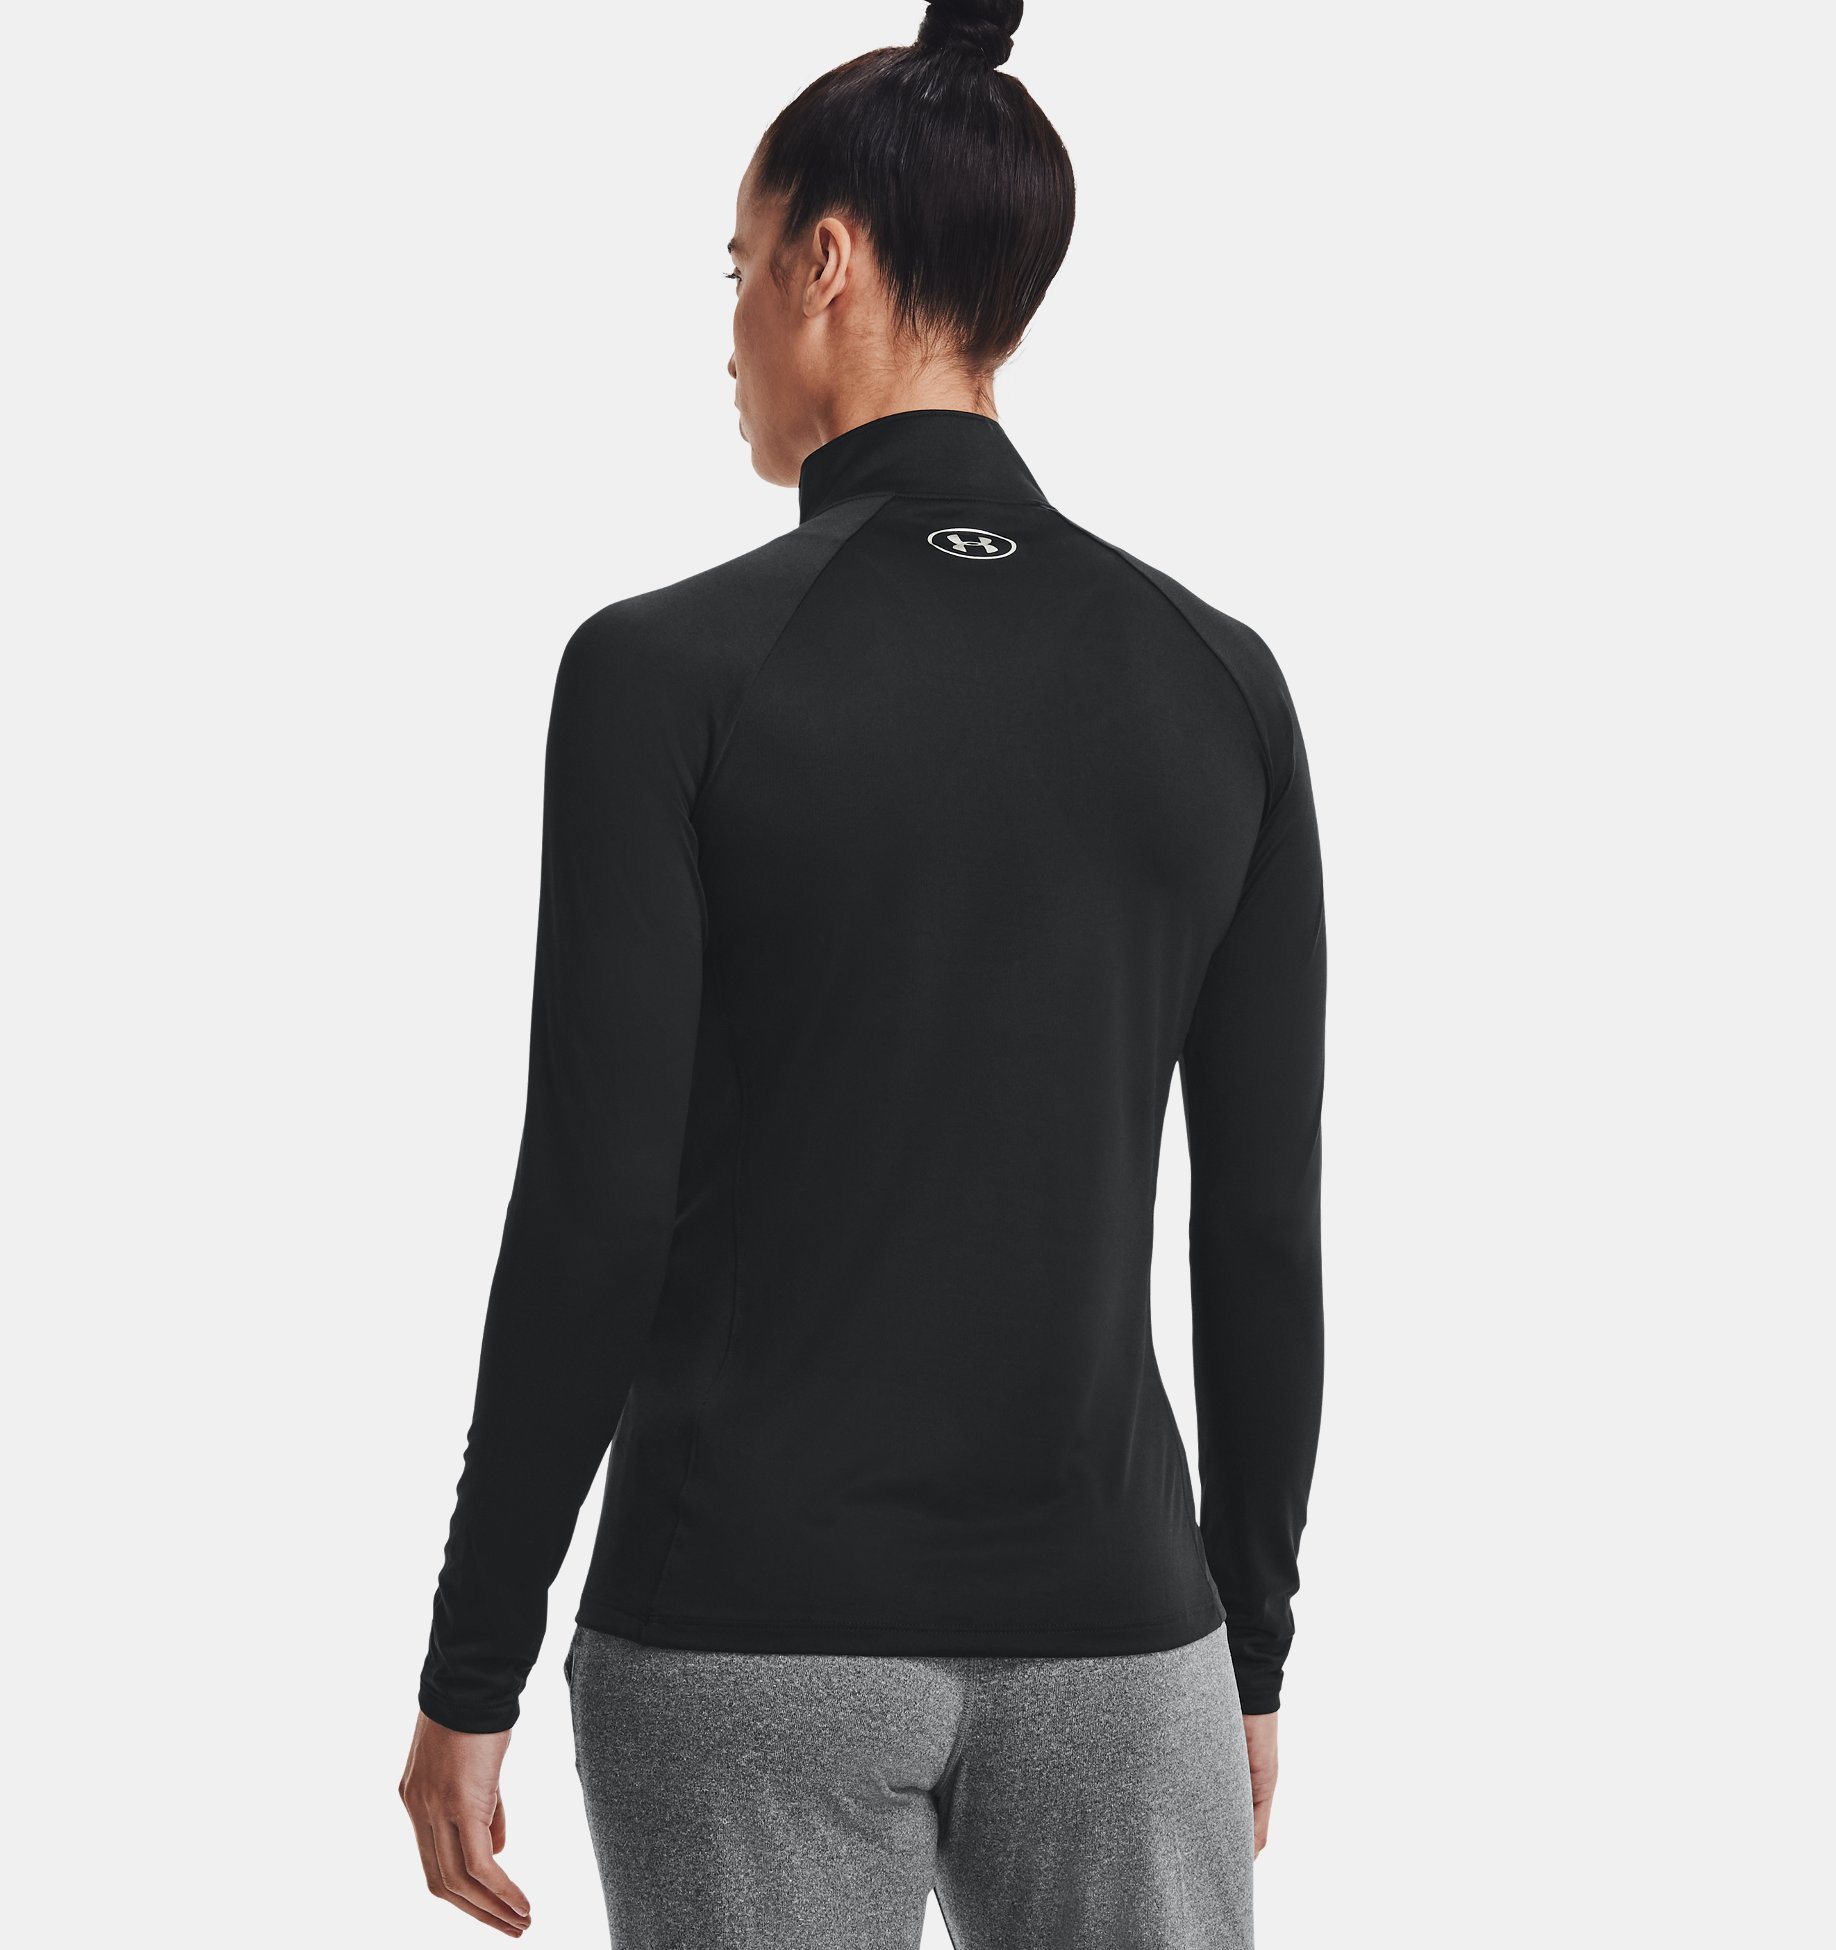 Women’s Under Armour Heatgear 1/2 Zip Semi-Fitted New With Tags 